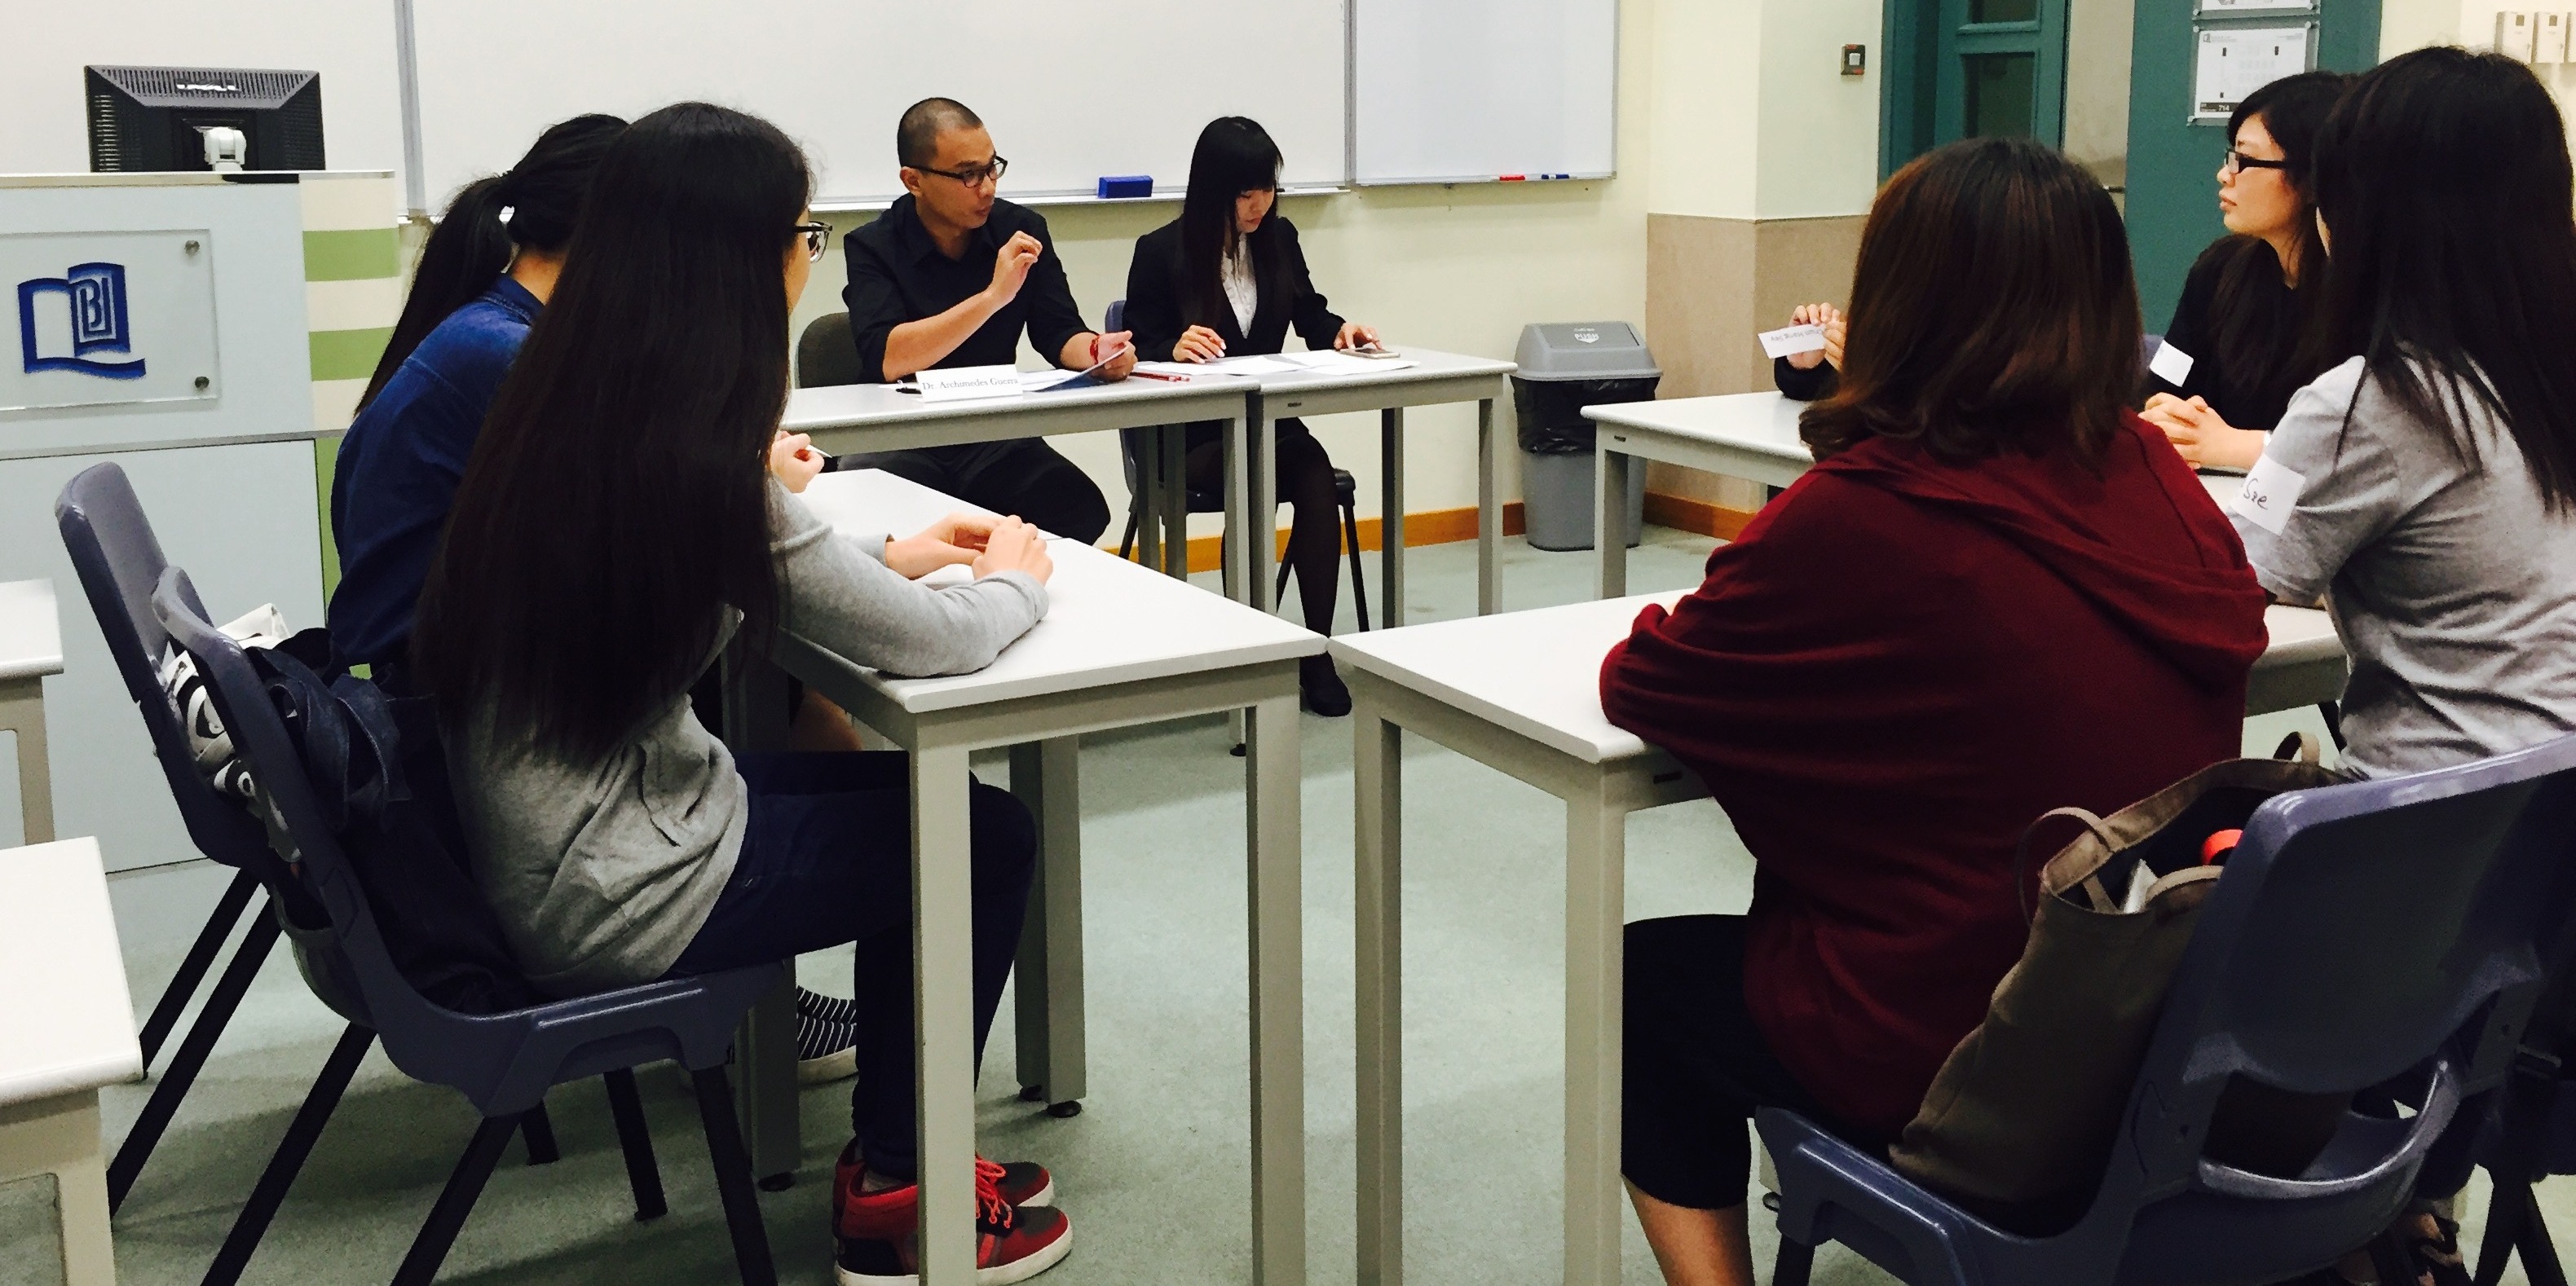 Follow-up mock interview workshops have been arranged to help students to strengthen their interview skills.